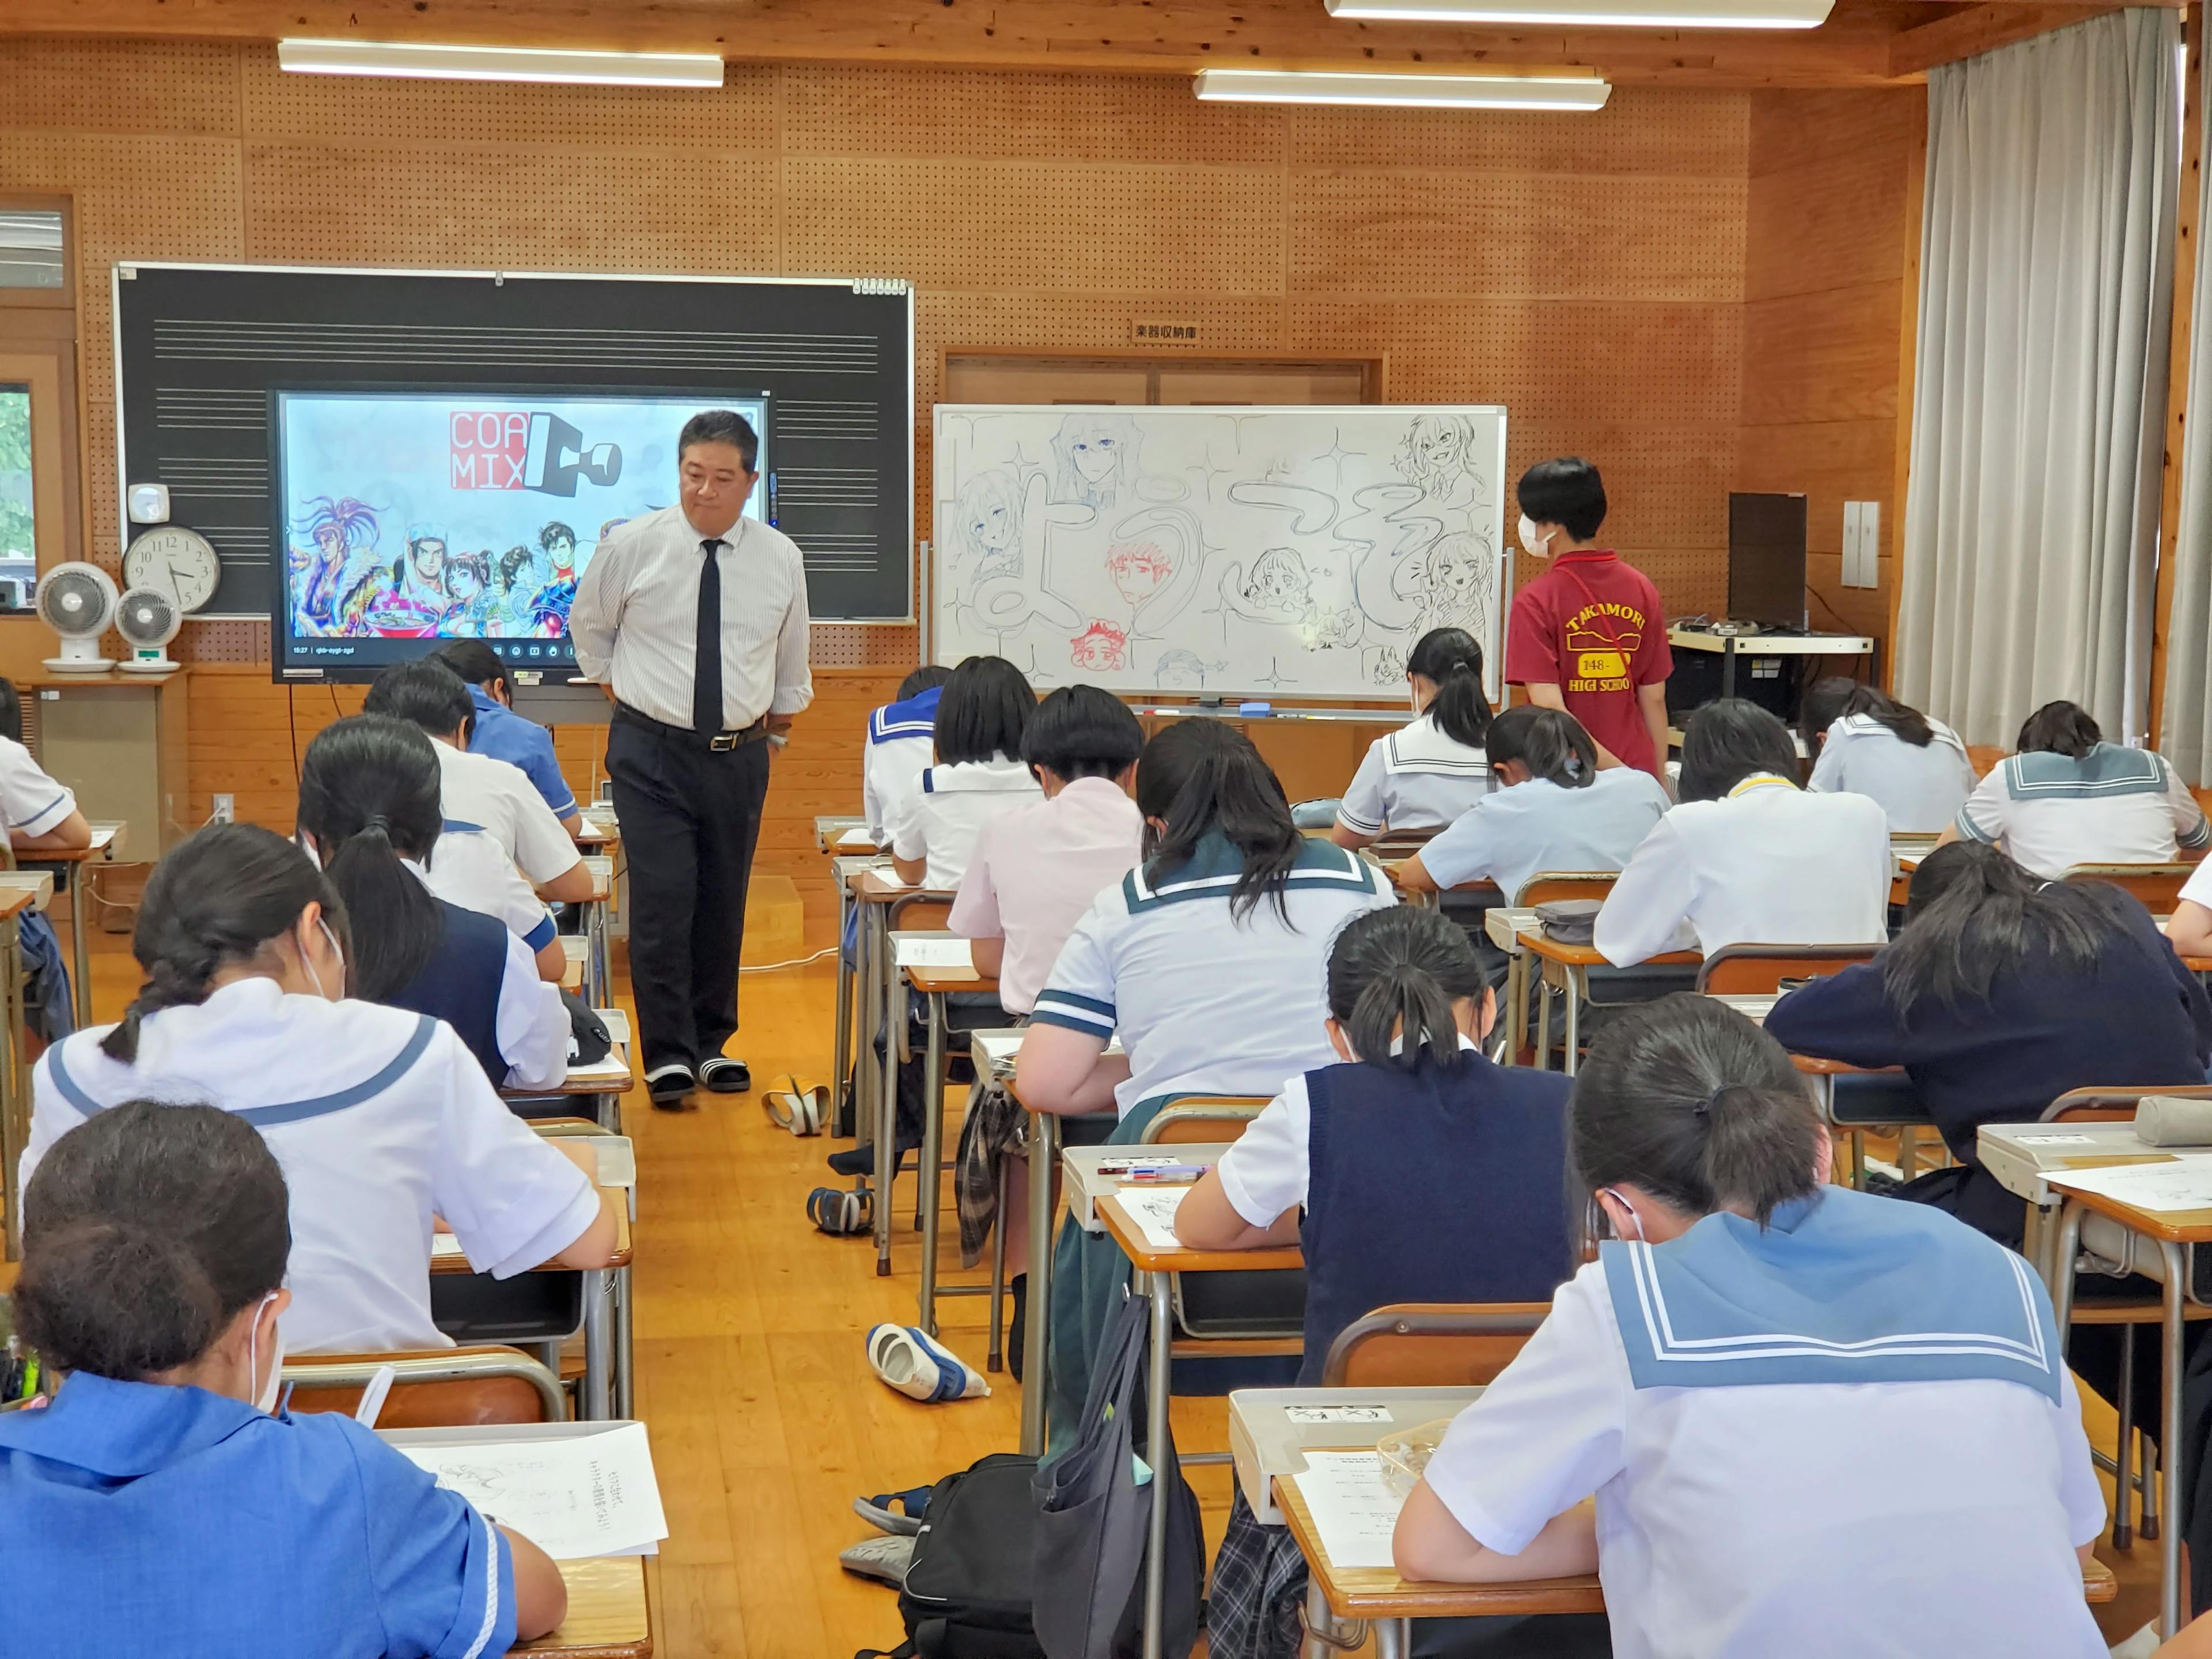 The first public high school open school with a manga department was a huge success, exceeding last year's.